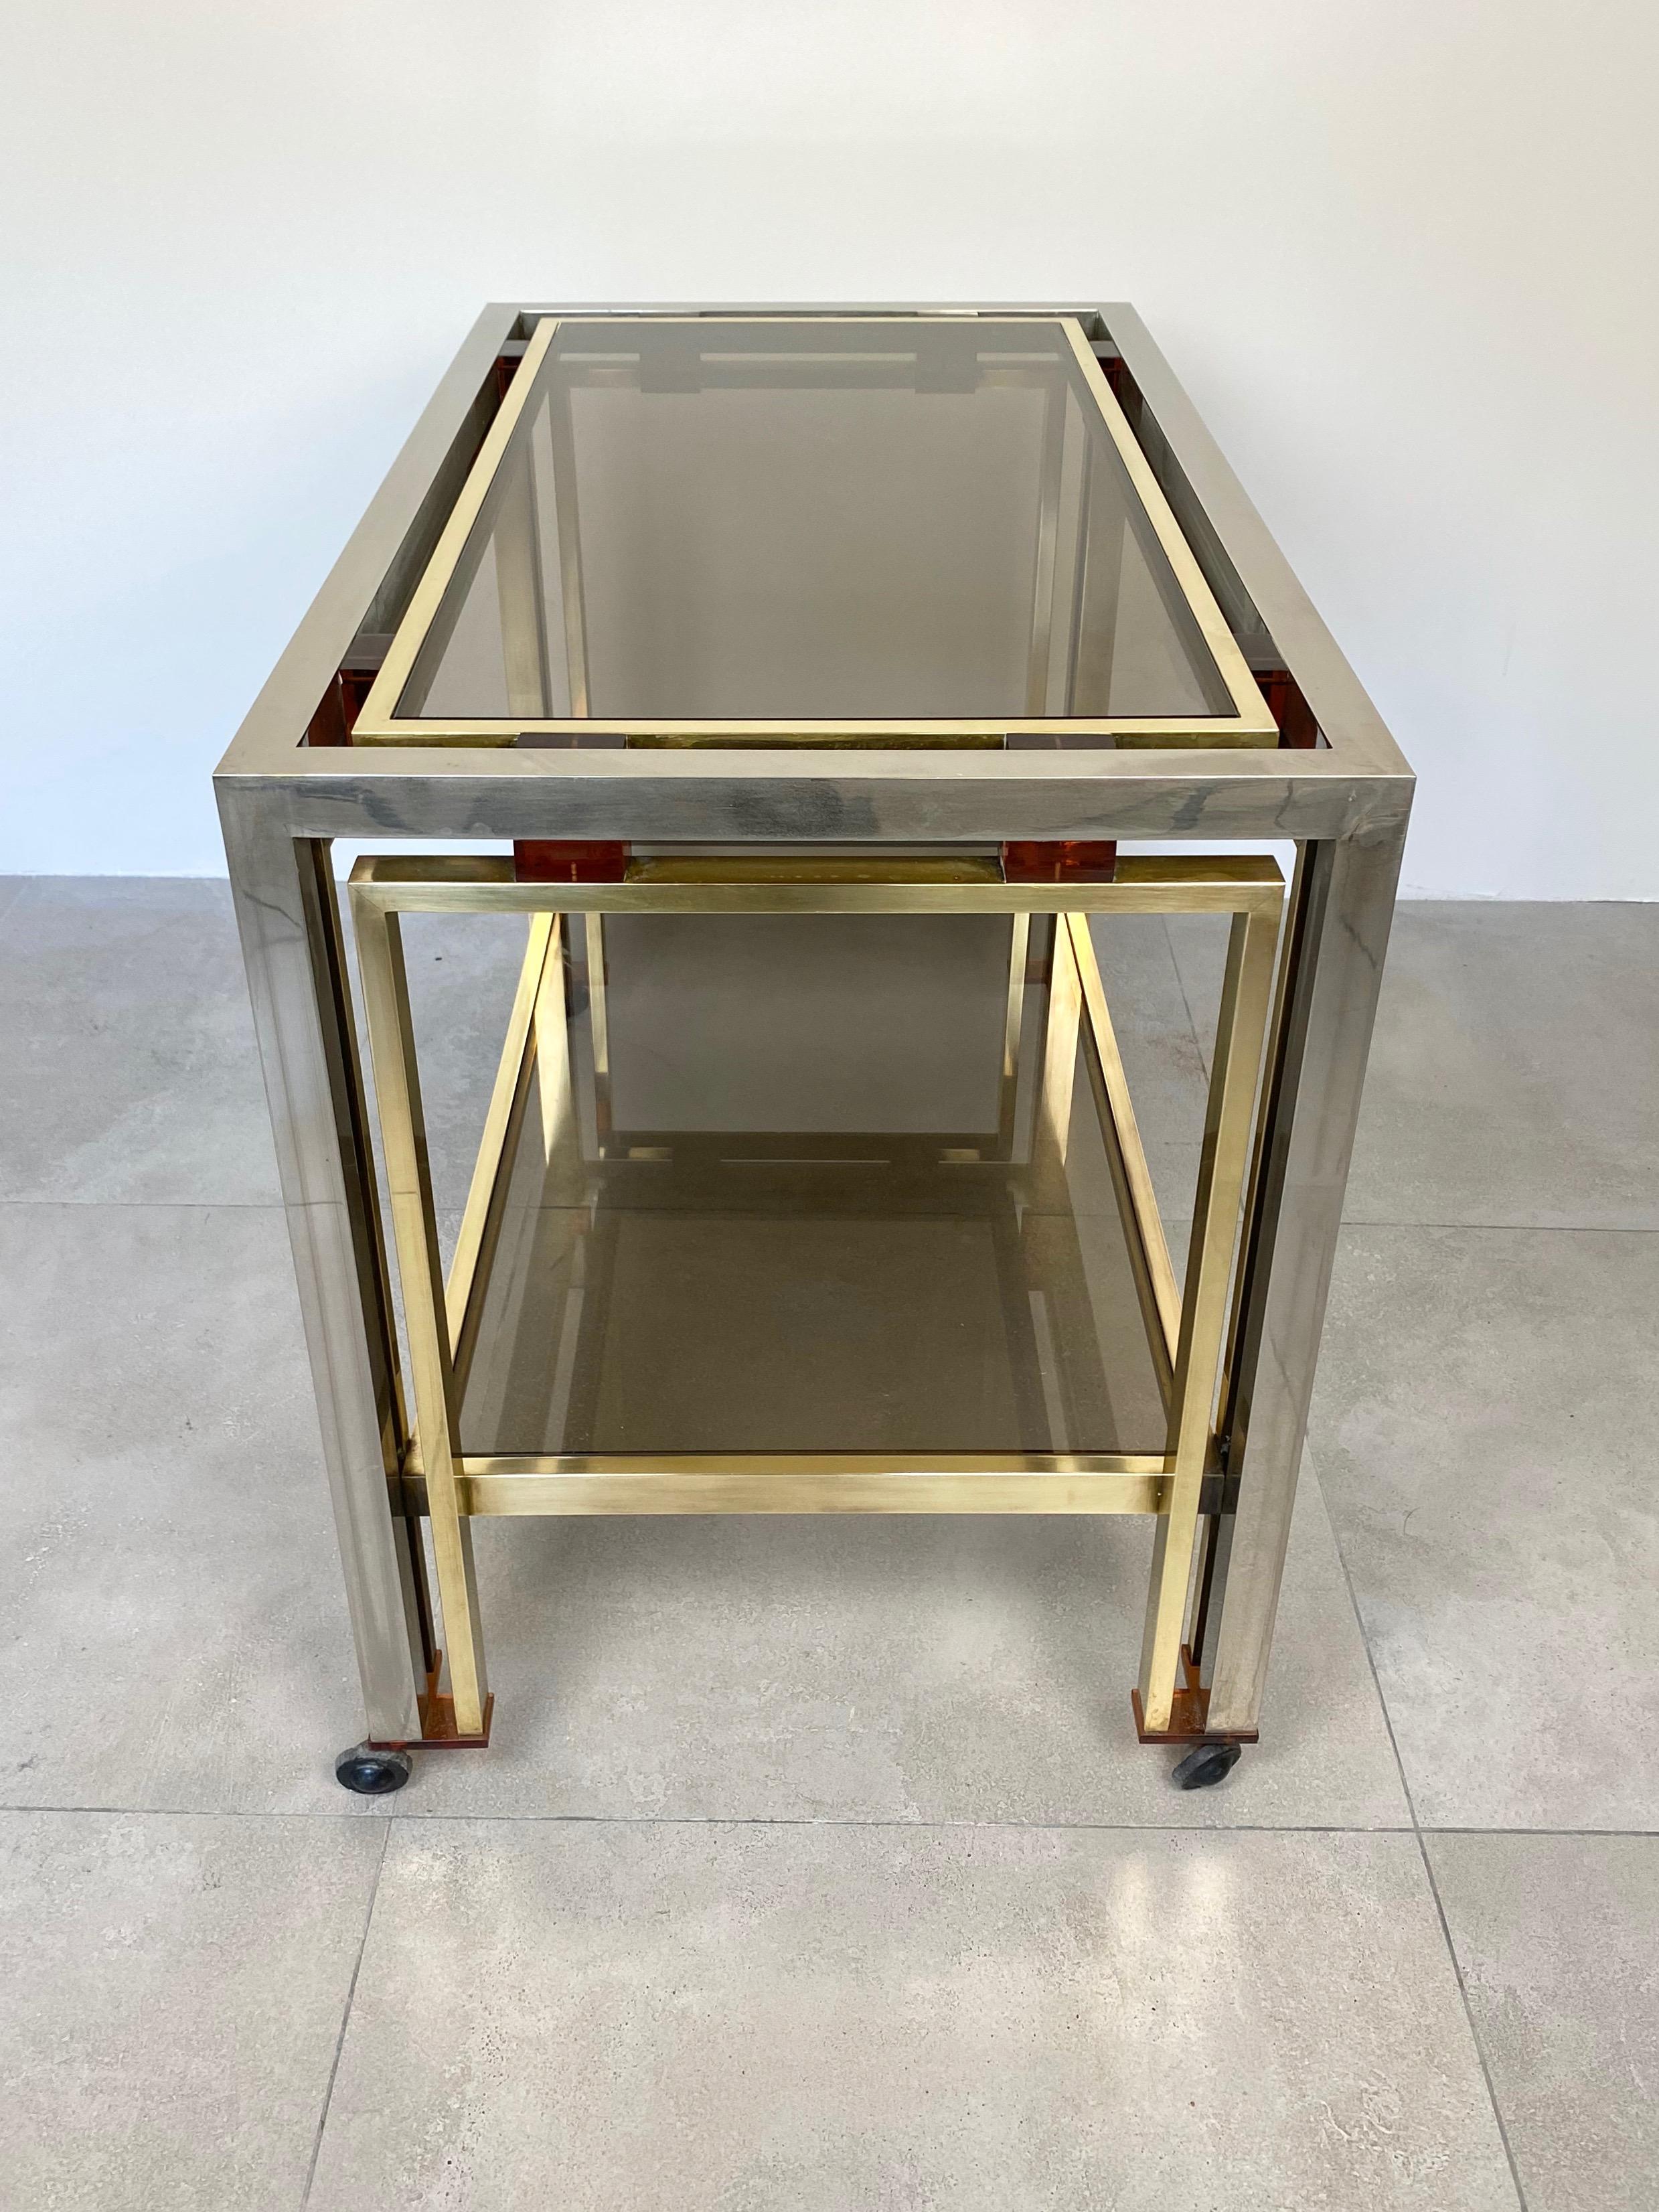 Romeo Rega Cart Table in Chrome, Lucite and Brass, Italy, 1970s For Sale 2